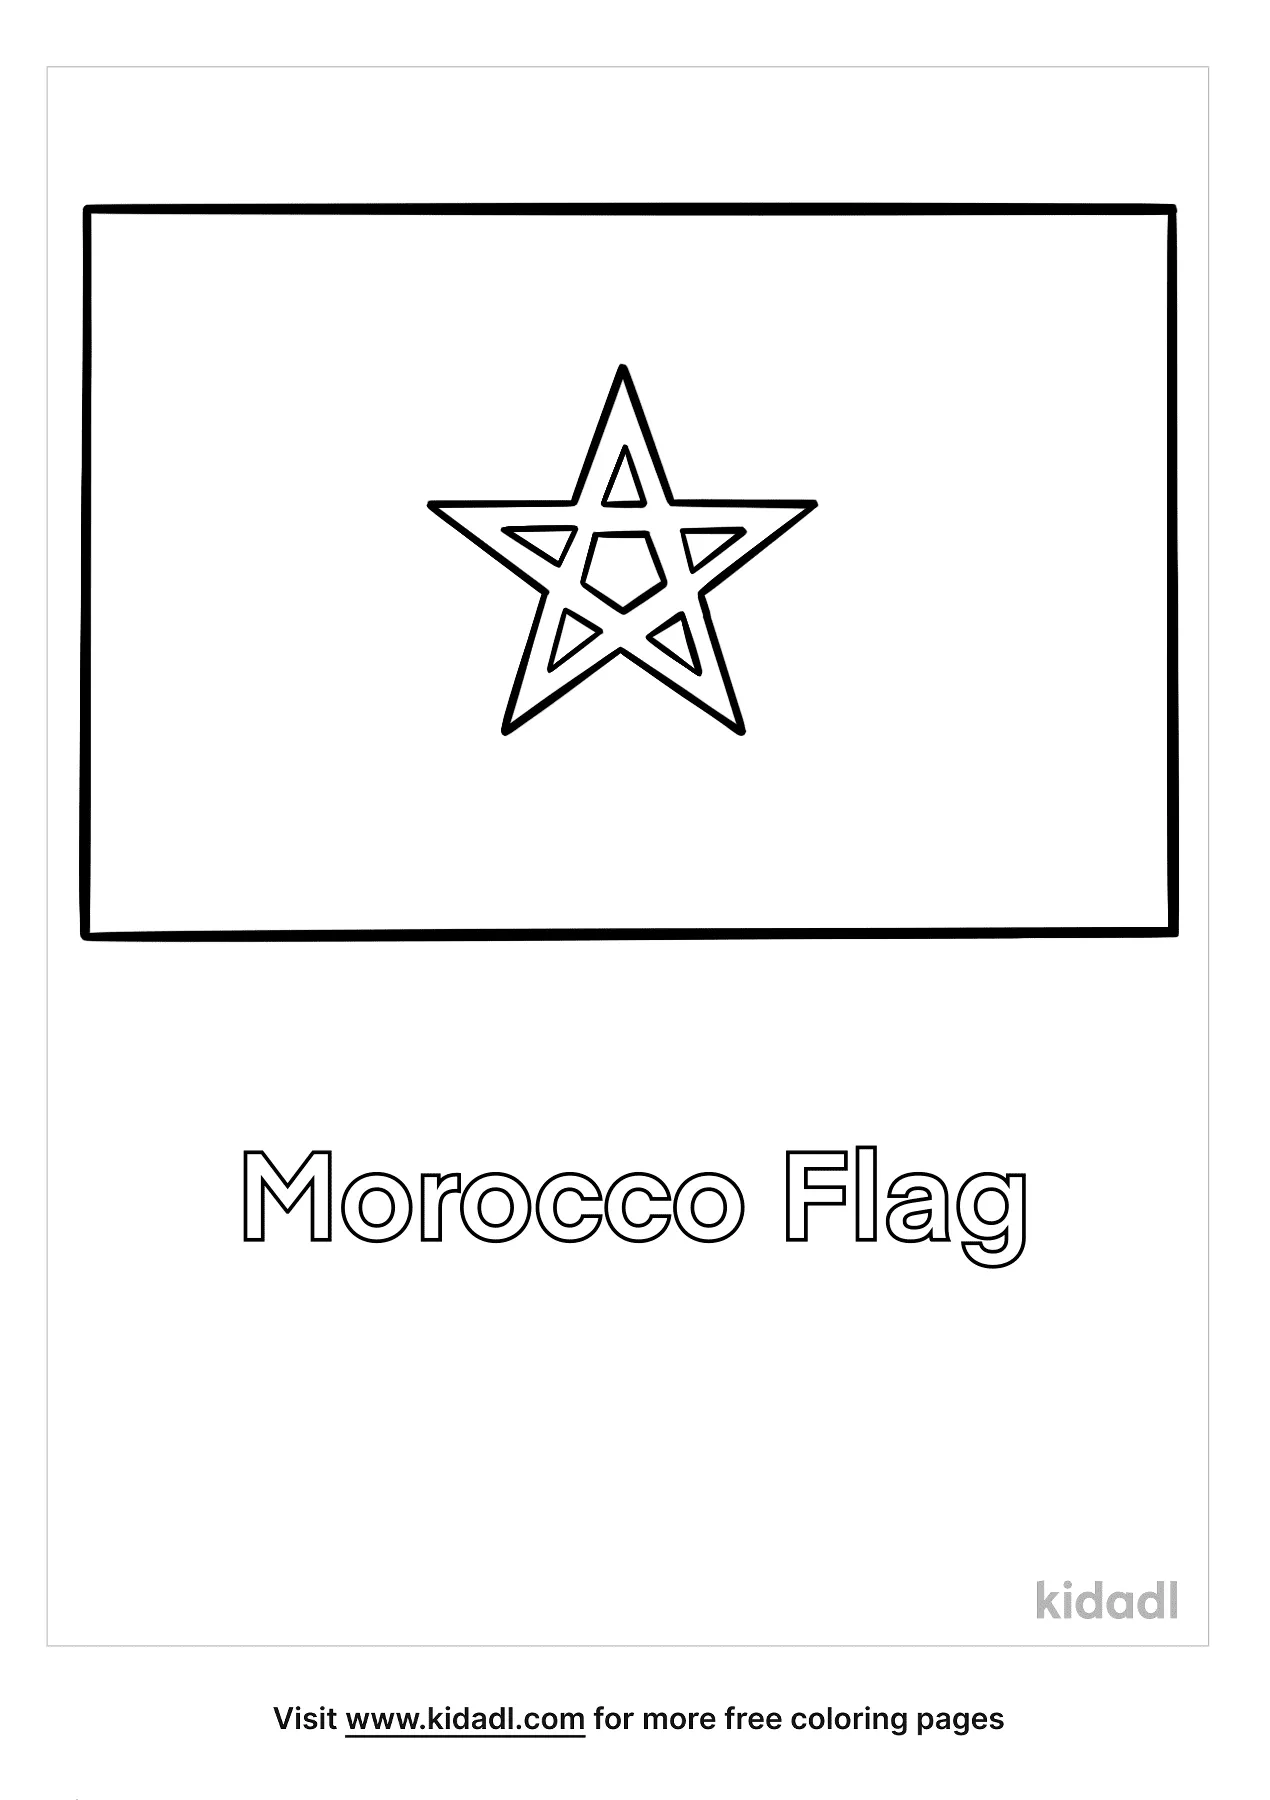 Free morocco flag coloring page coloring page printables